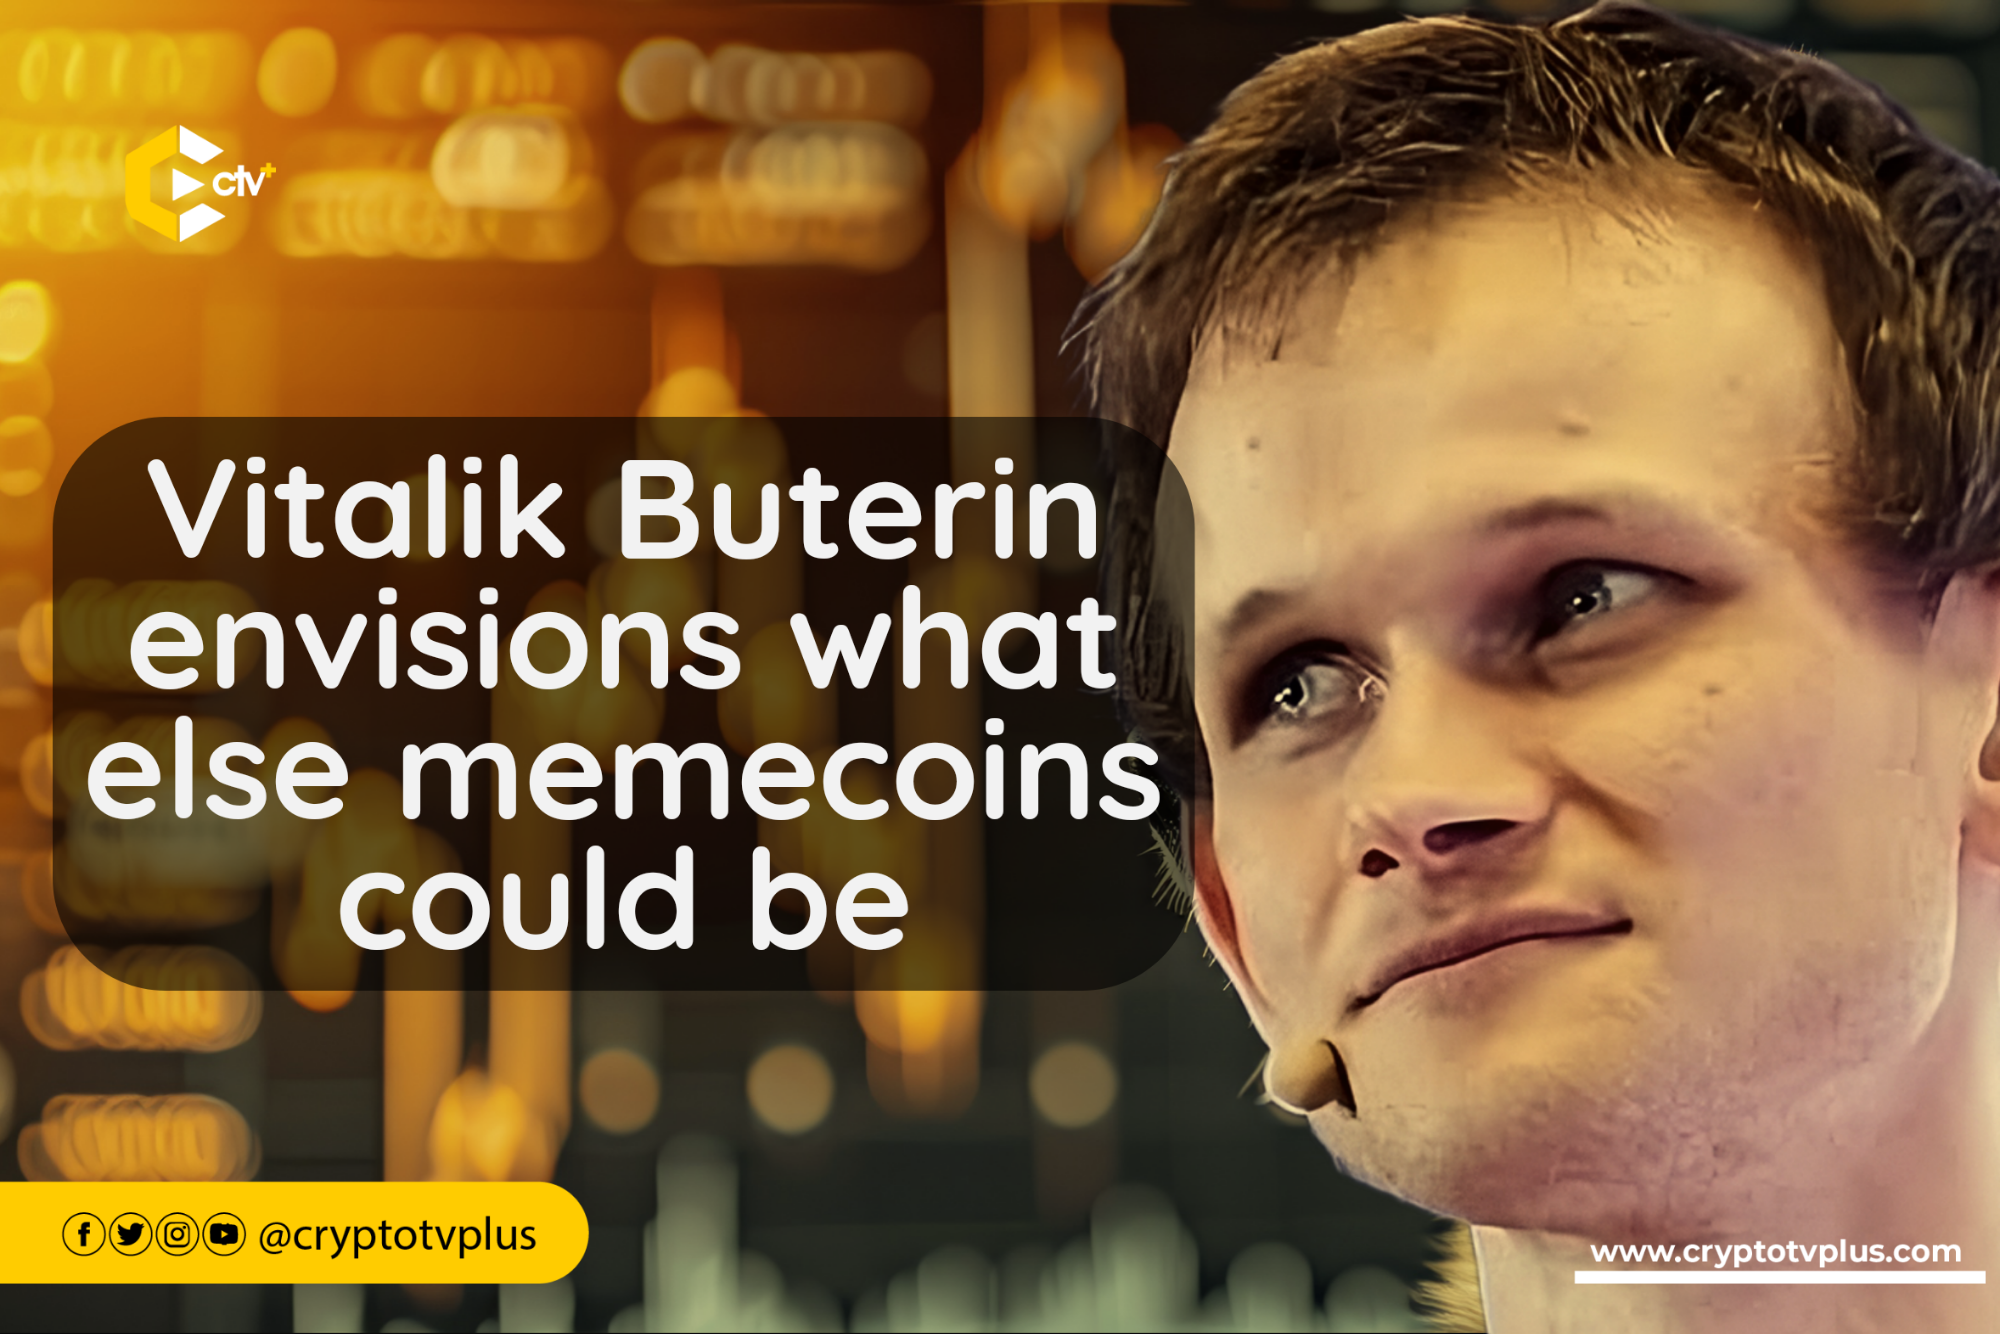 Vitalik Buterin envisions a future where memecoins evolve beyond their current status, potentially transforming into robust digital assets with real-world applications.